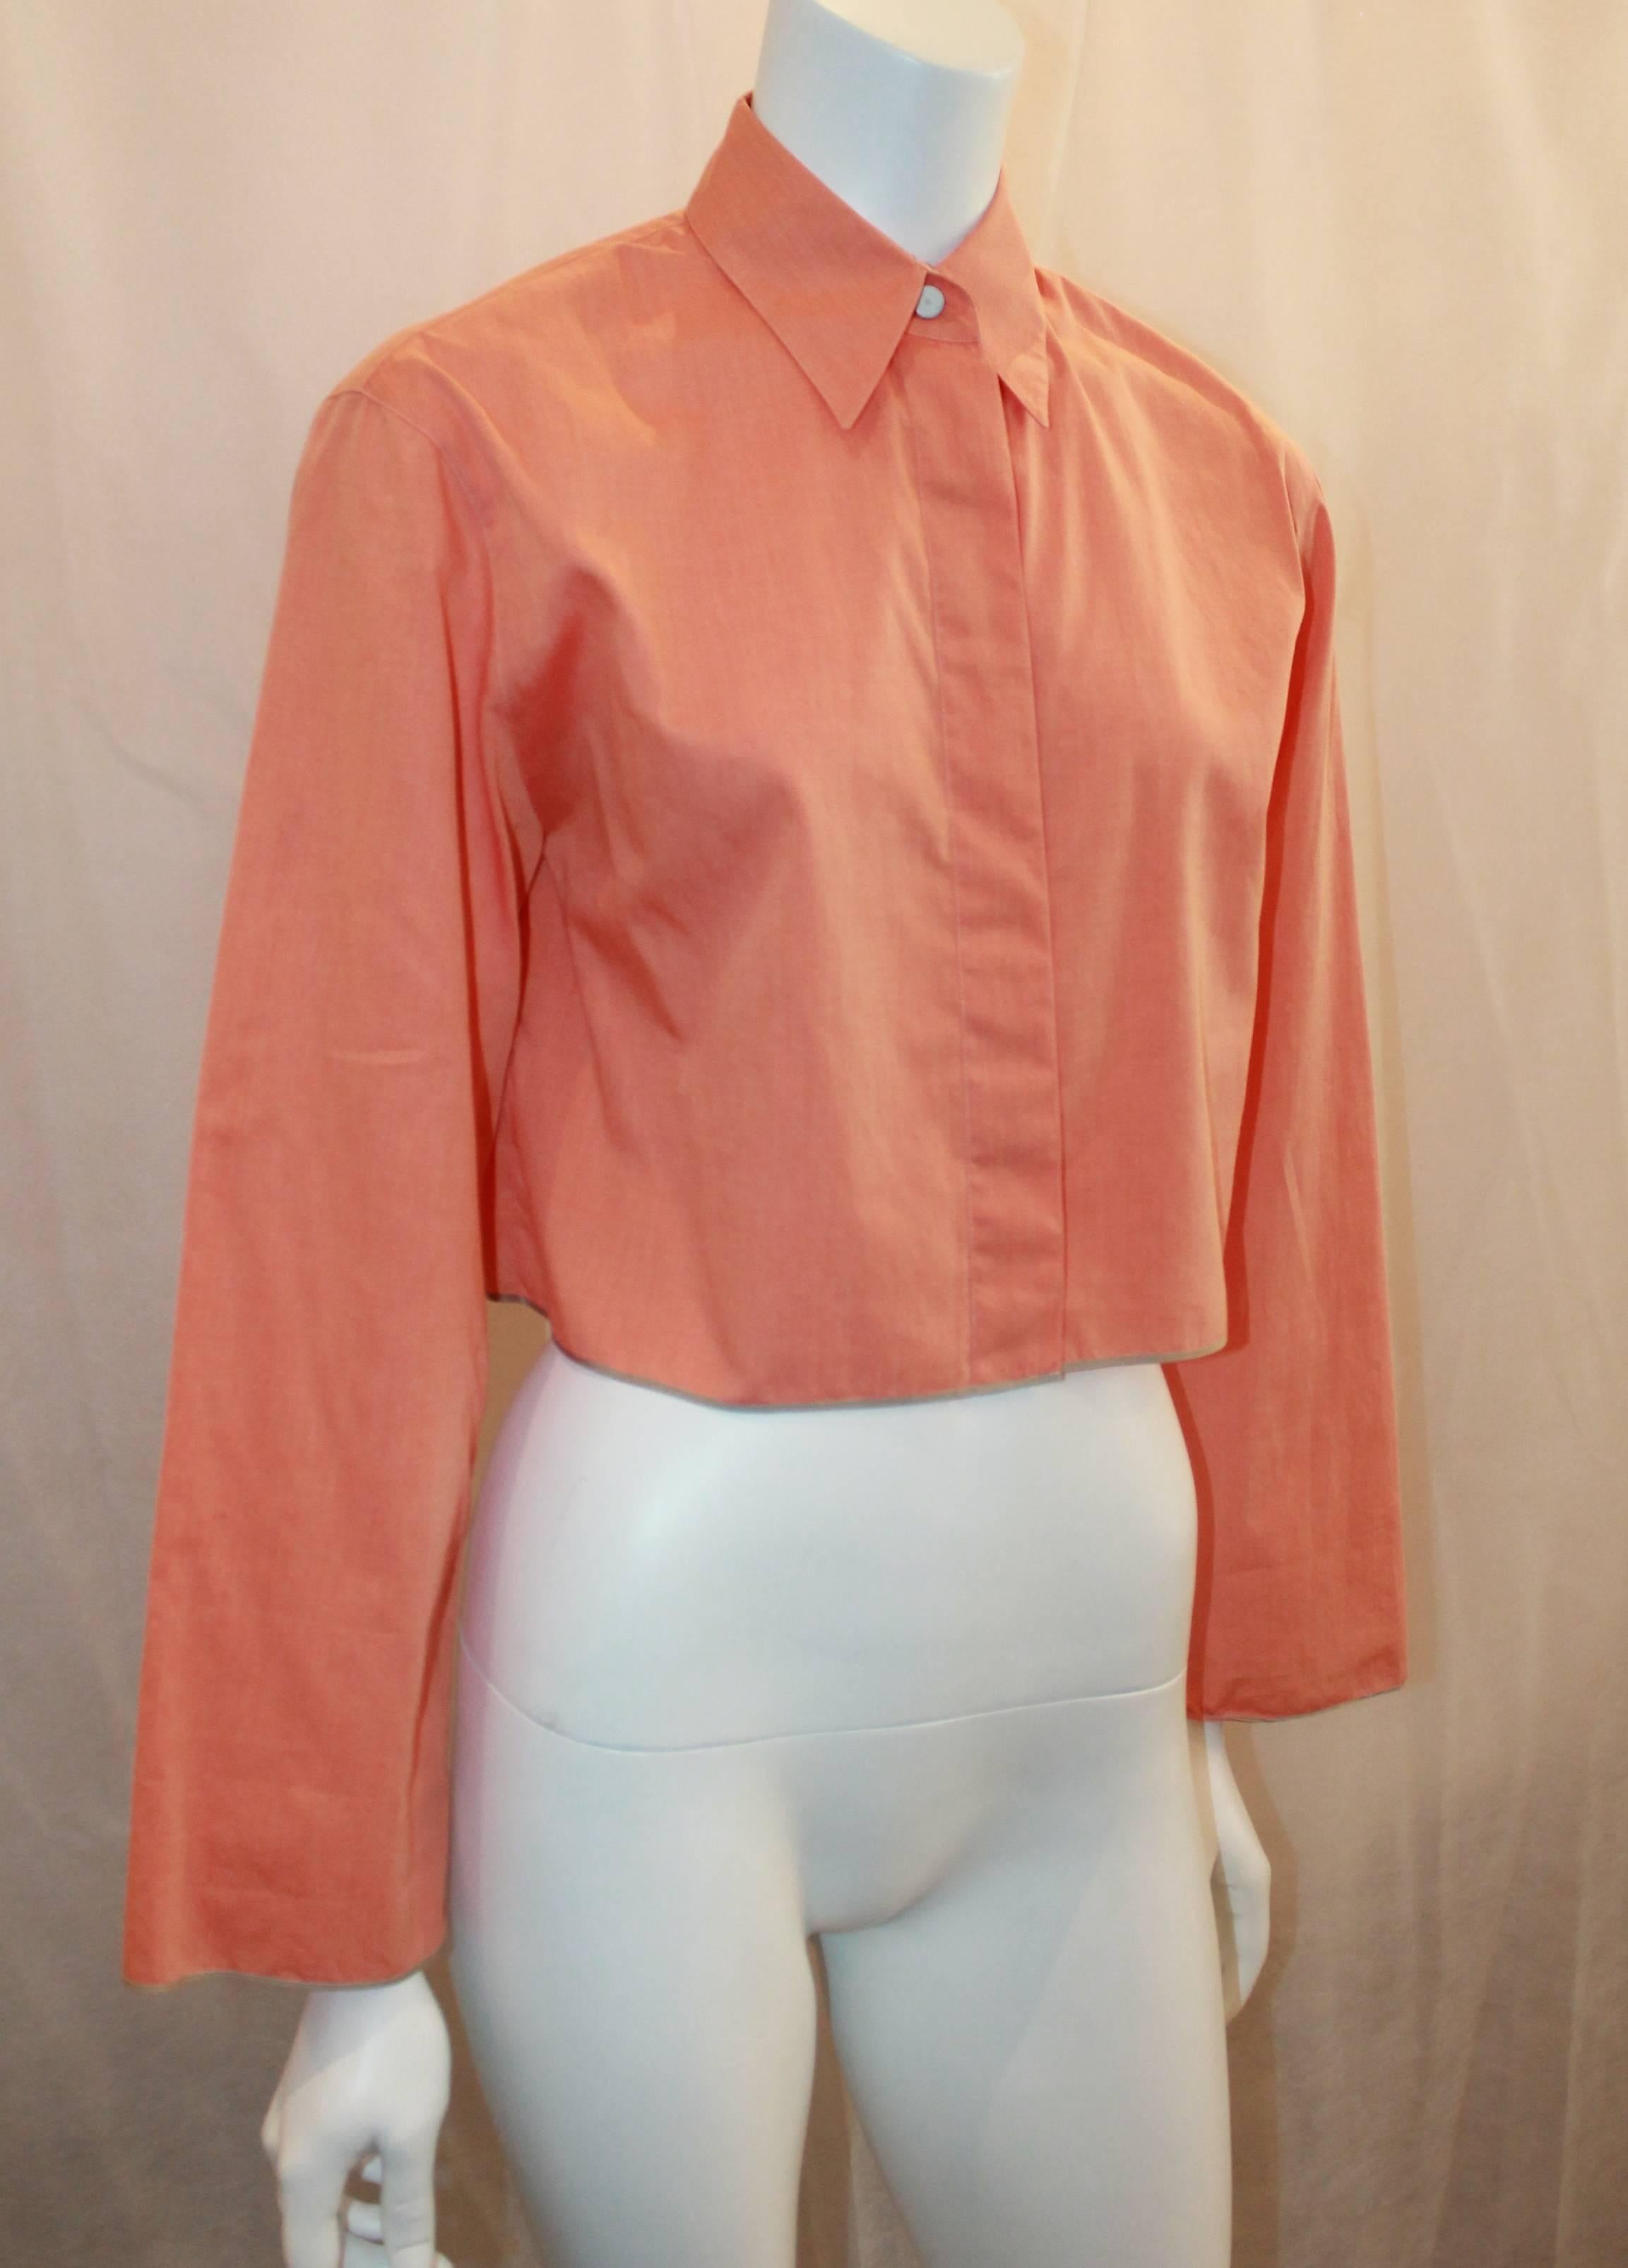 Chanel Vintage Orange Cotton Collared Cropped Top - 36 - 99P. This top is in excellent condition and is perfect for the spring and summer seasons. It features wide long sleeves, hidden buttons, and a faint olive trimming. 

Measurements:
Bust-